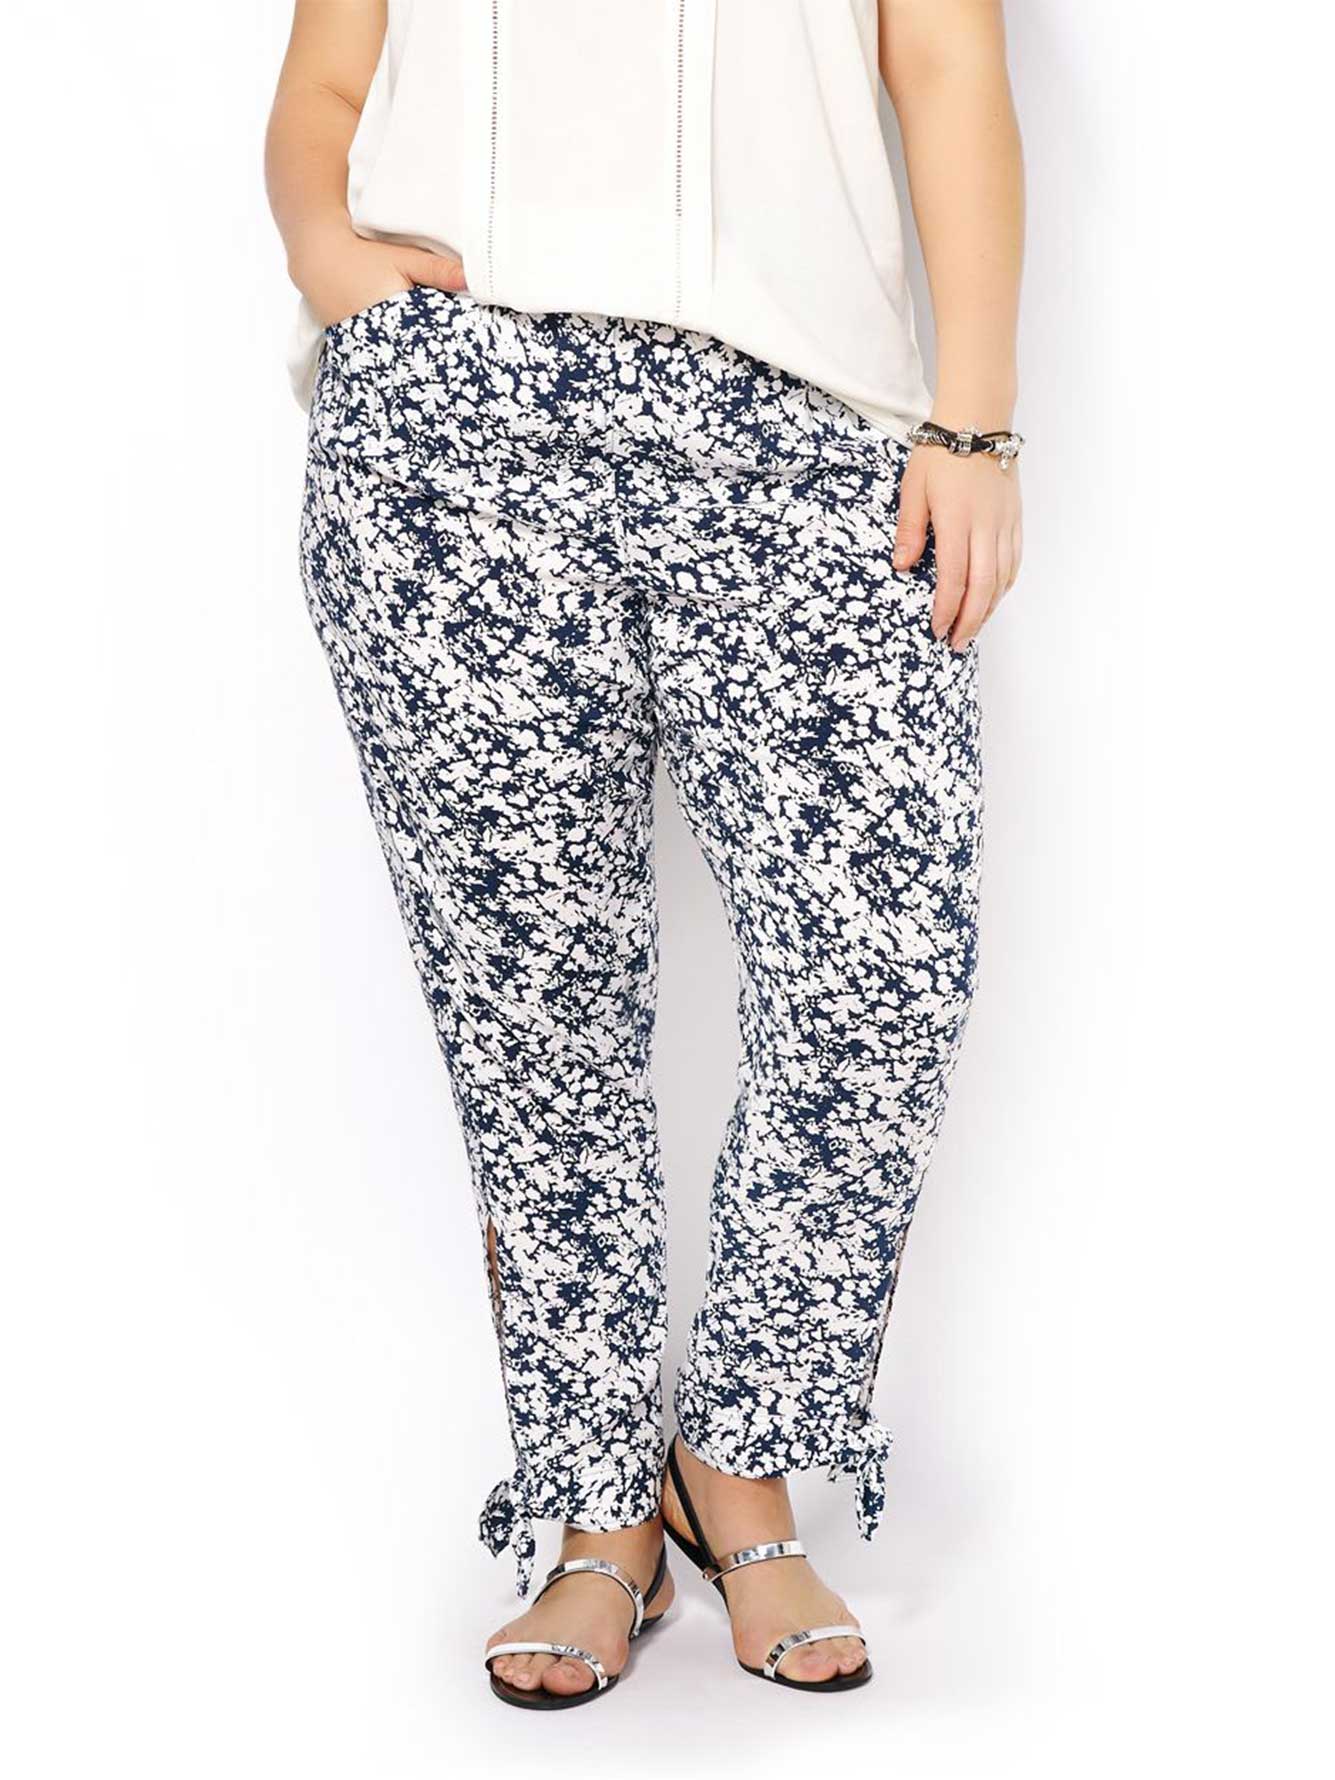 Slightly Curvy Fit Printed Pant with Ties | Penningtons